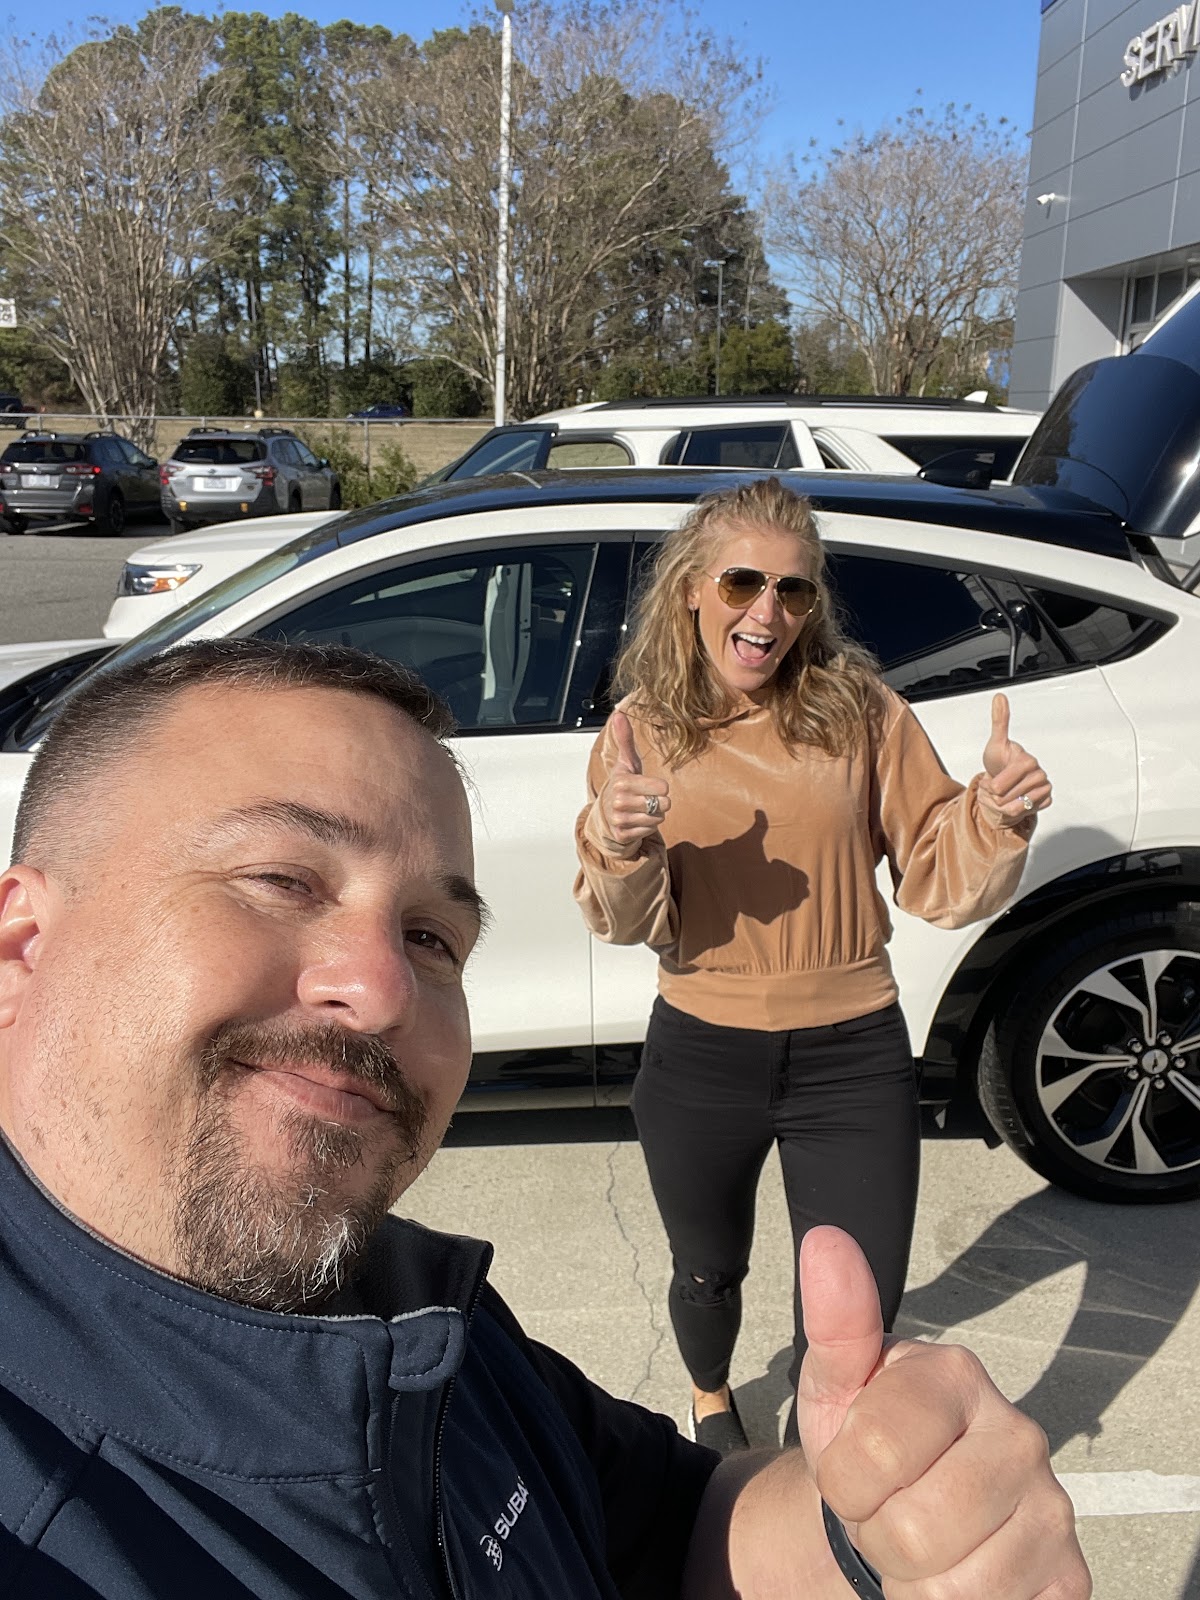 Jimmy Gerhold shaking hands with a happy customer in front of a newly purchased car at Riverside Subaru, symbolizing trusted service and customer satisfaction in New Bern, NC